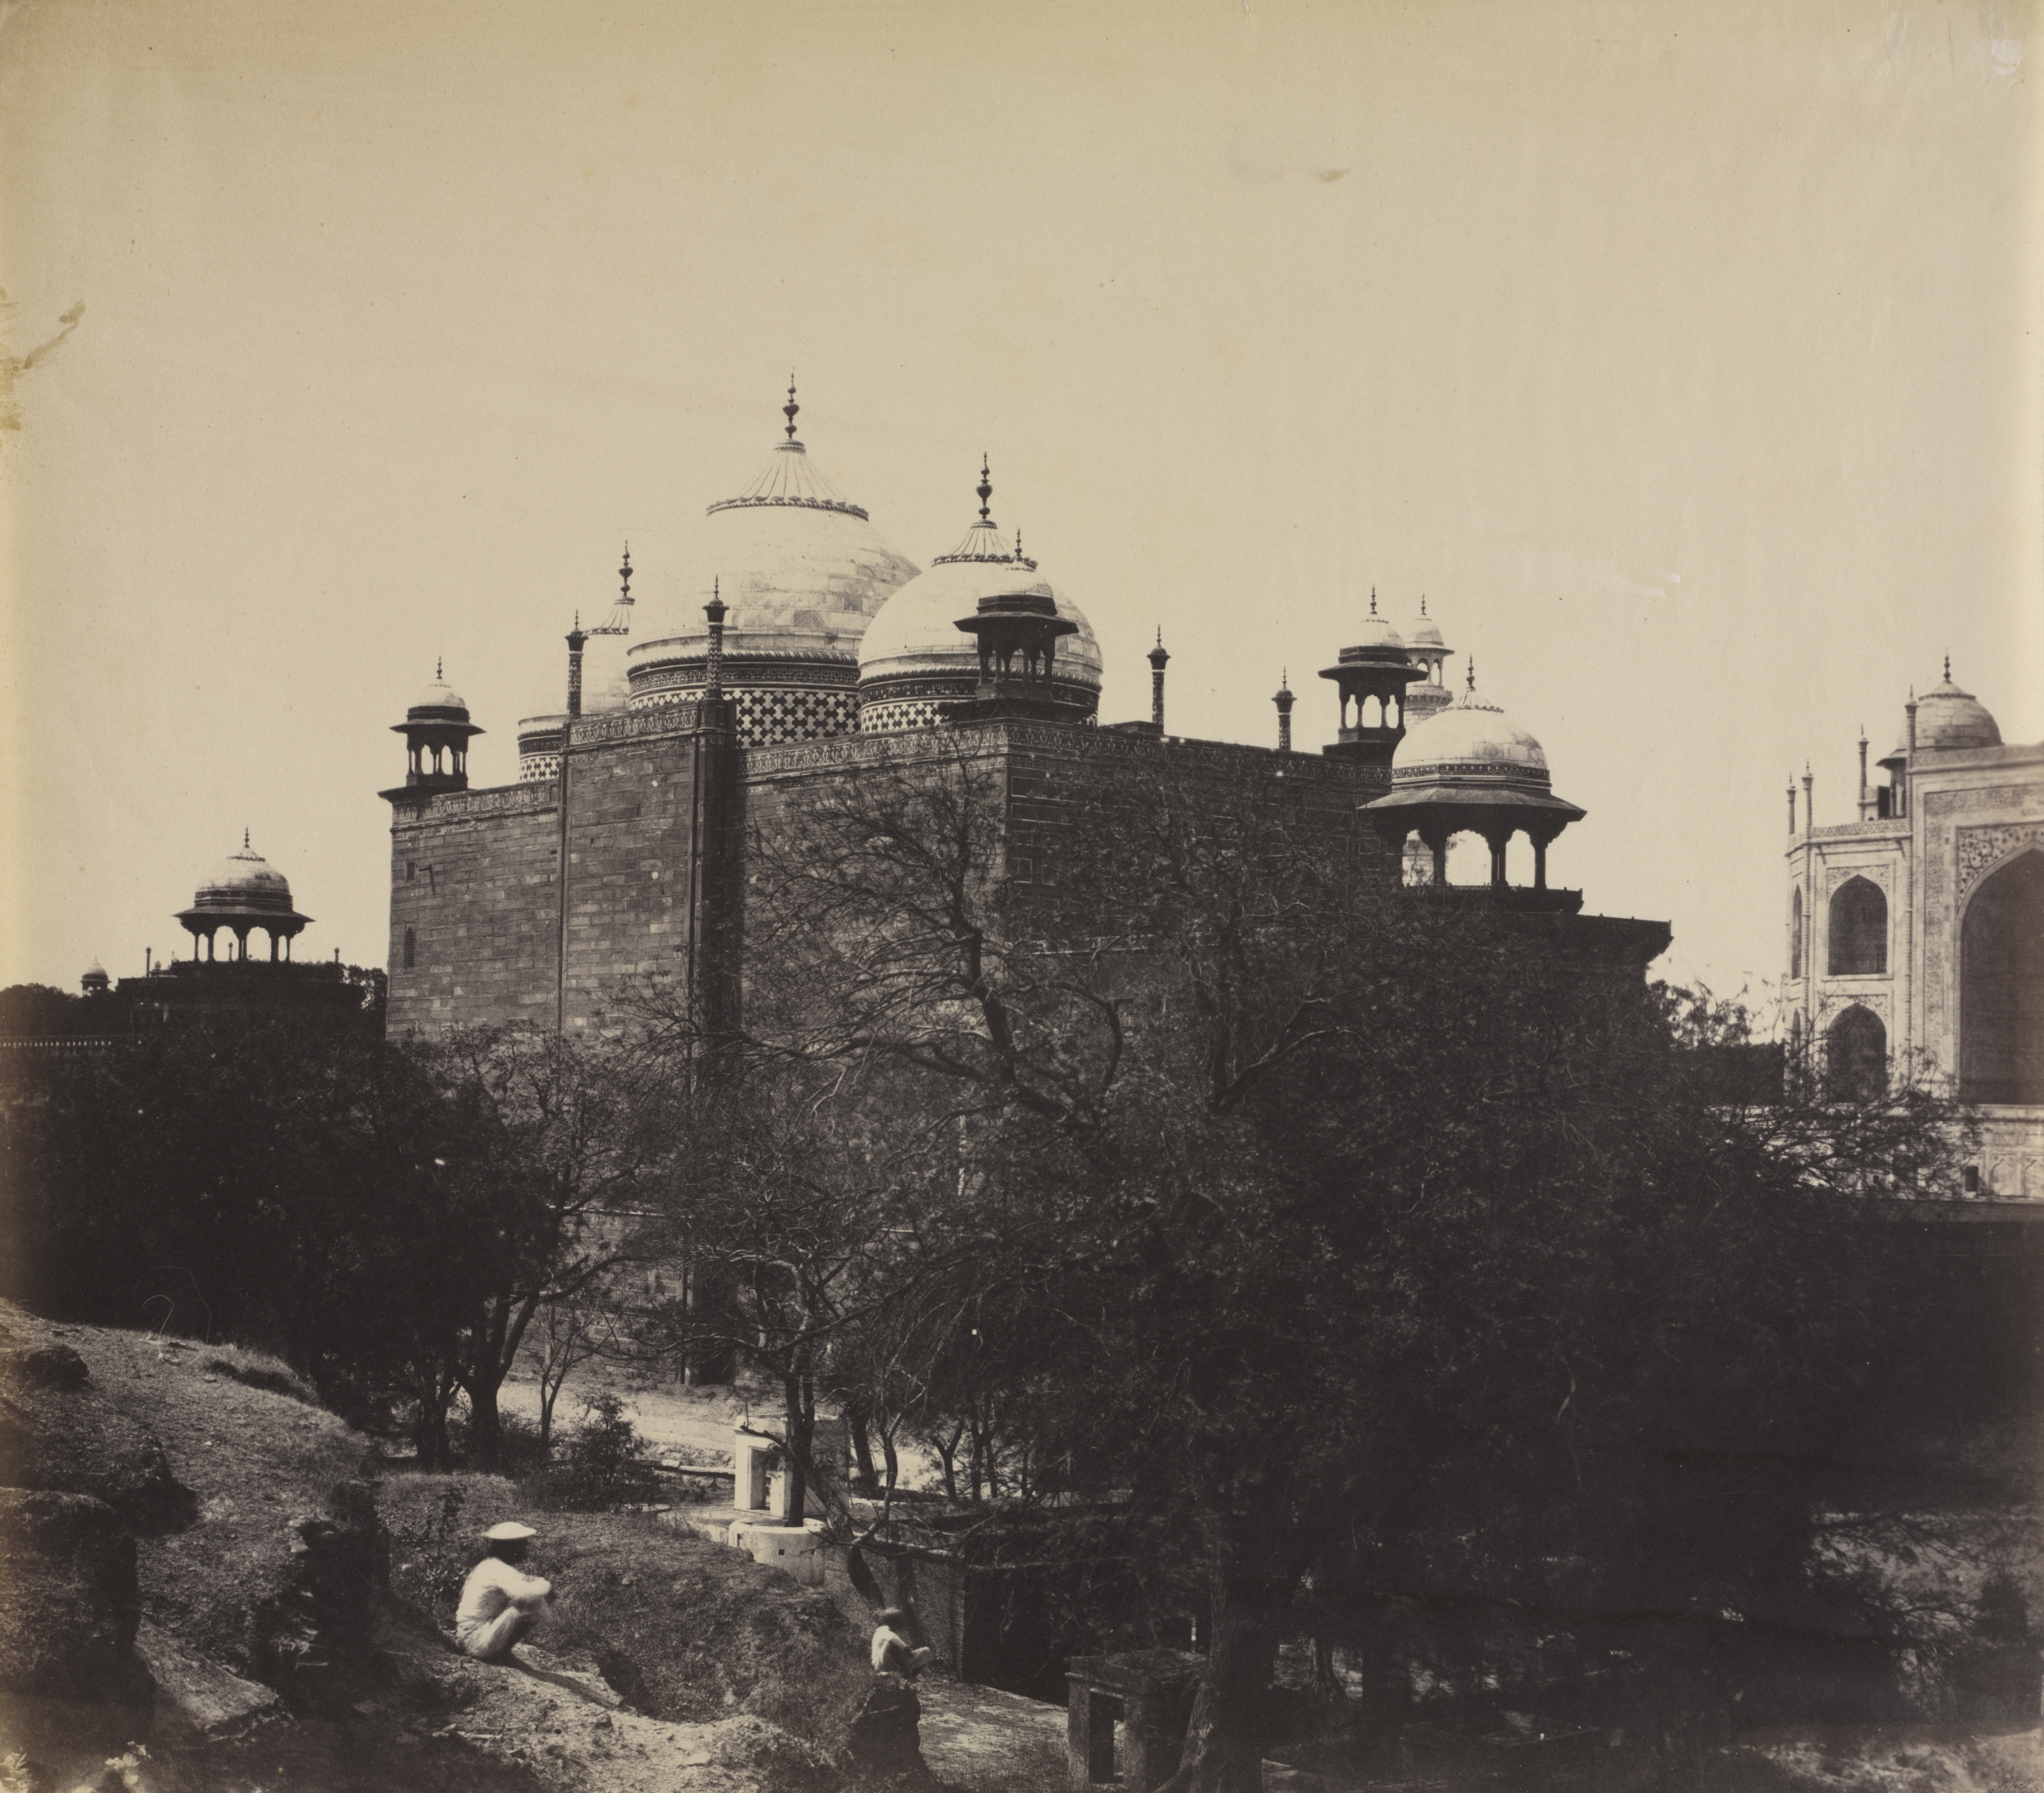 Taj Mahal, Back View of the Rest-House, with Figure